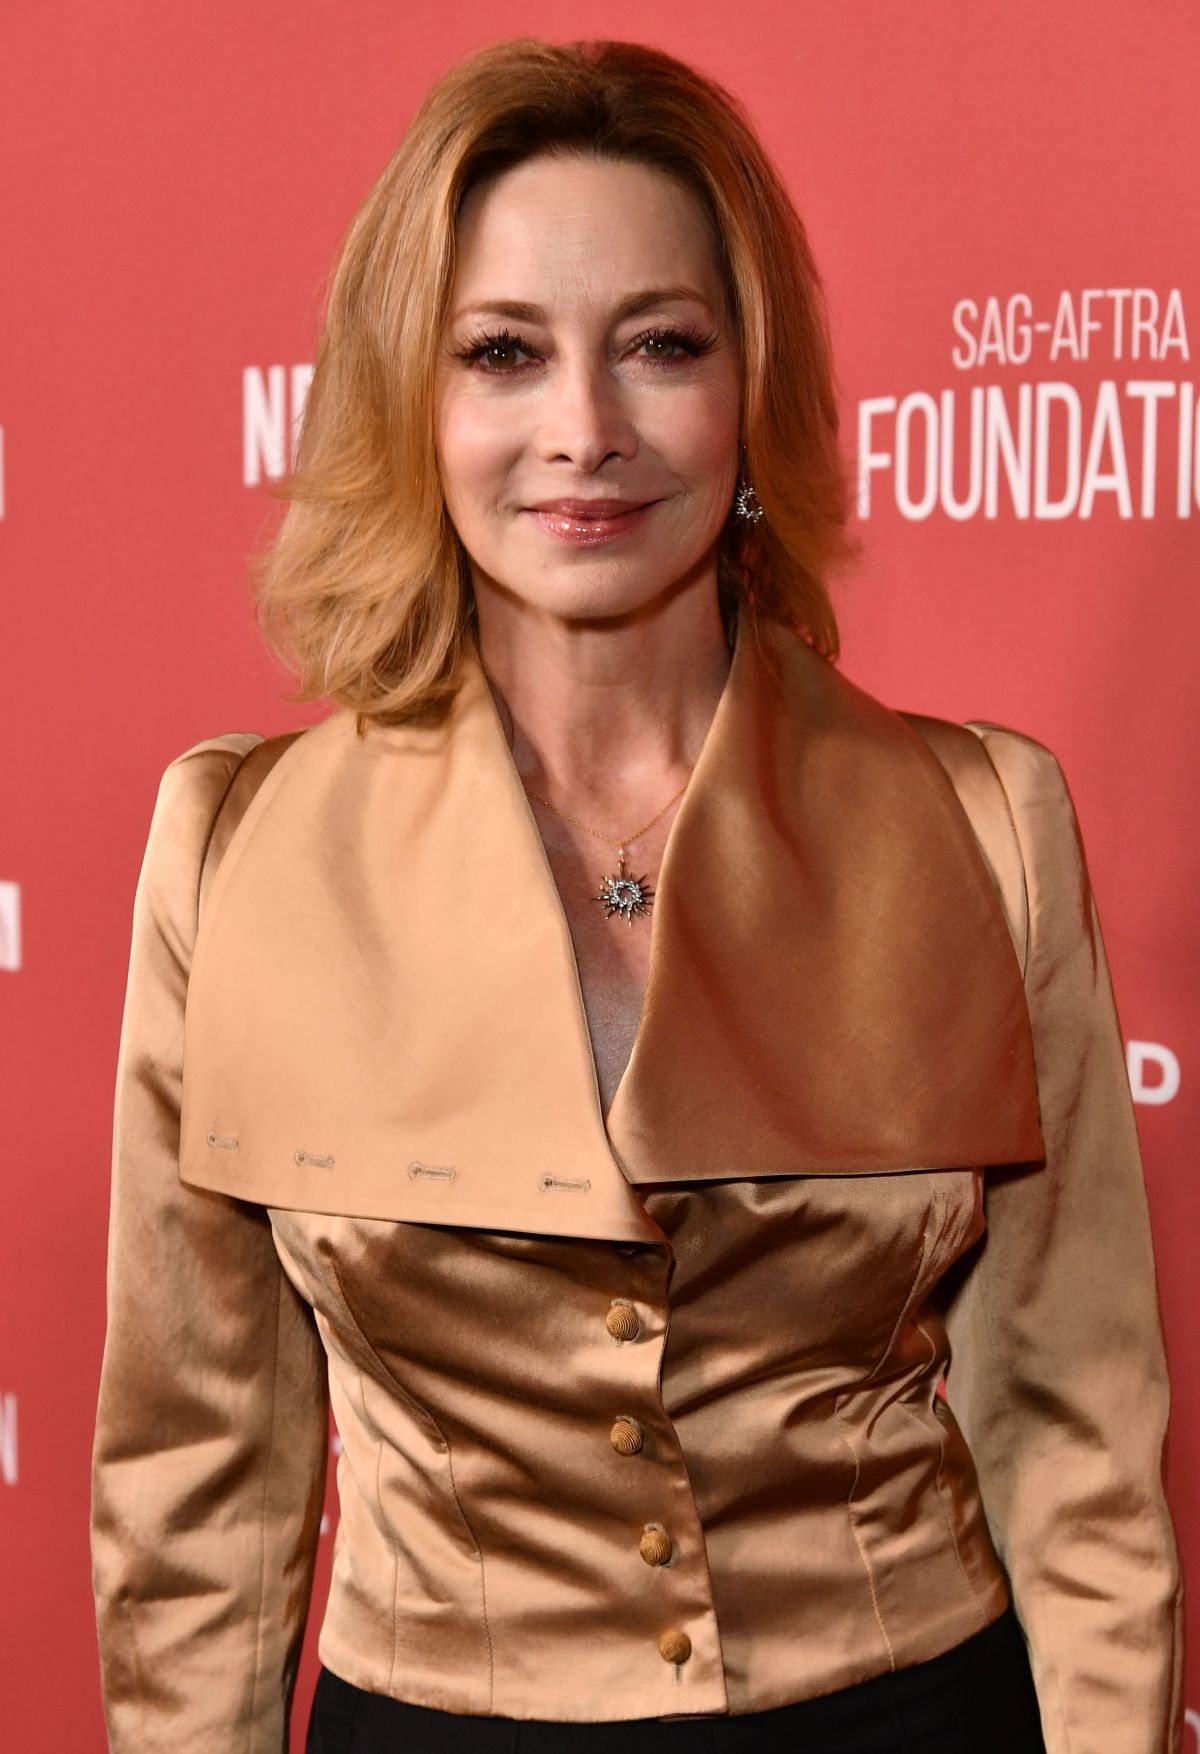 SHARON LAWRENCE at Sag-Aftra Foundation Patron of the Artists Awards in Bev...